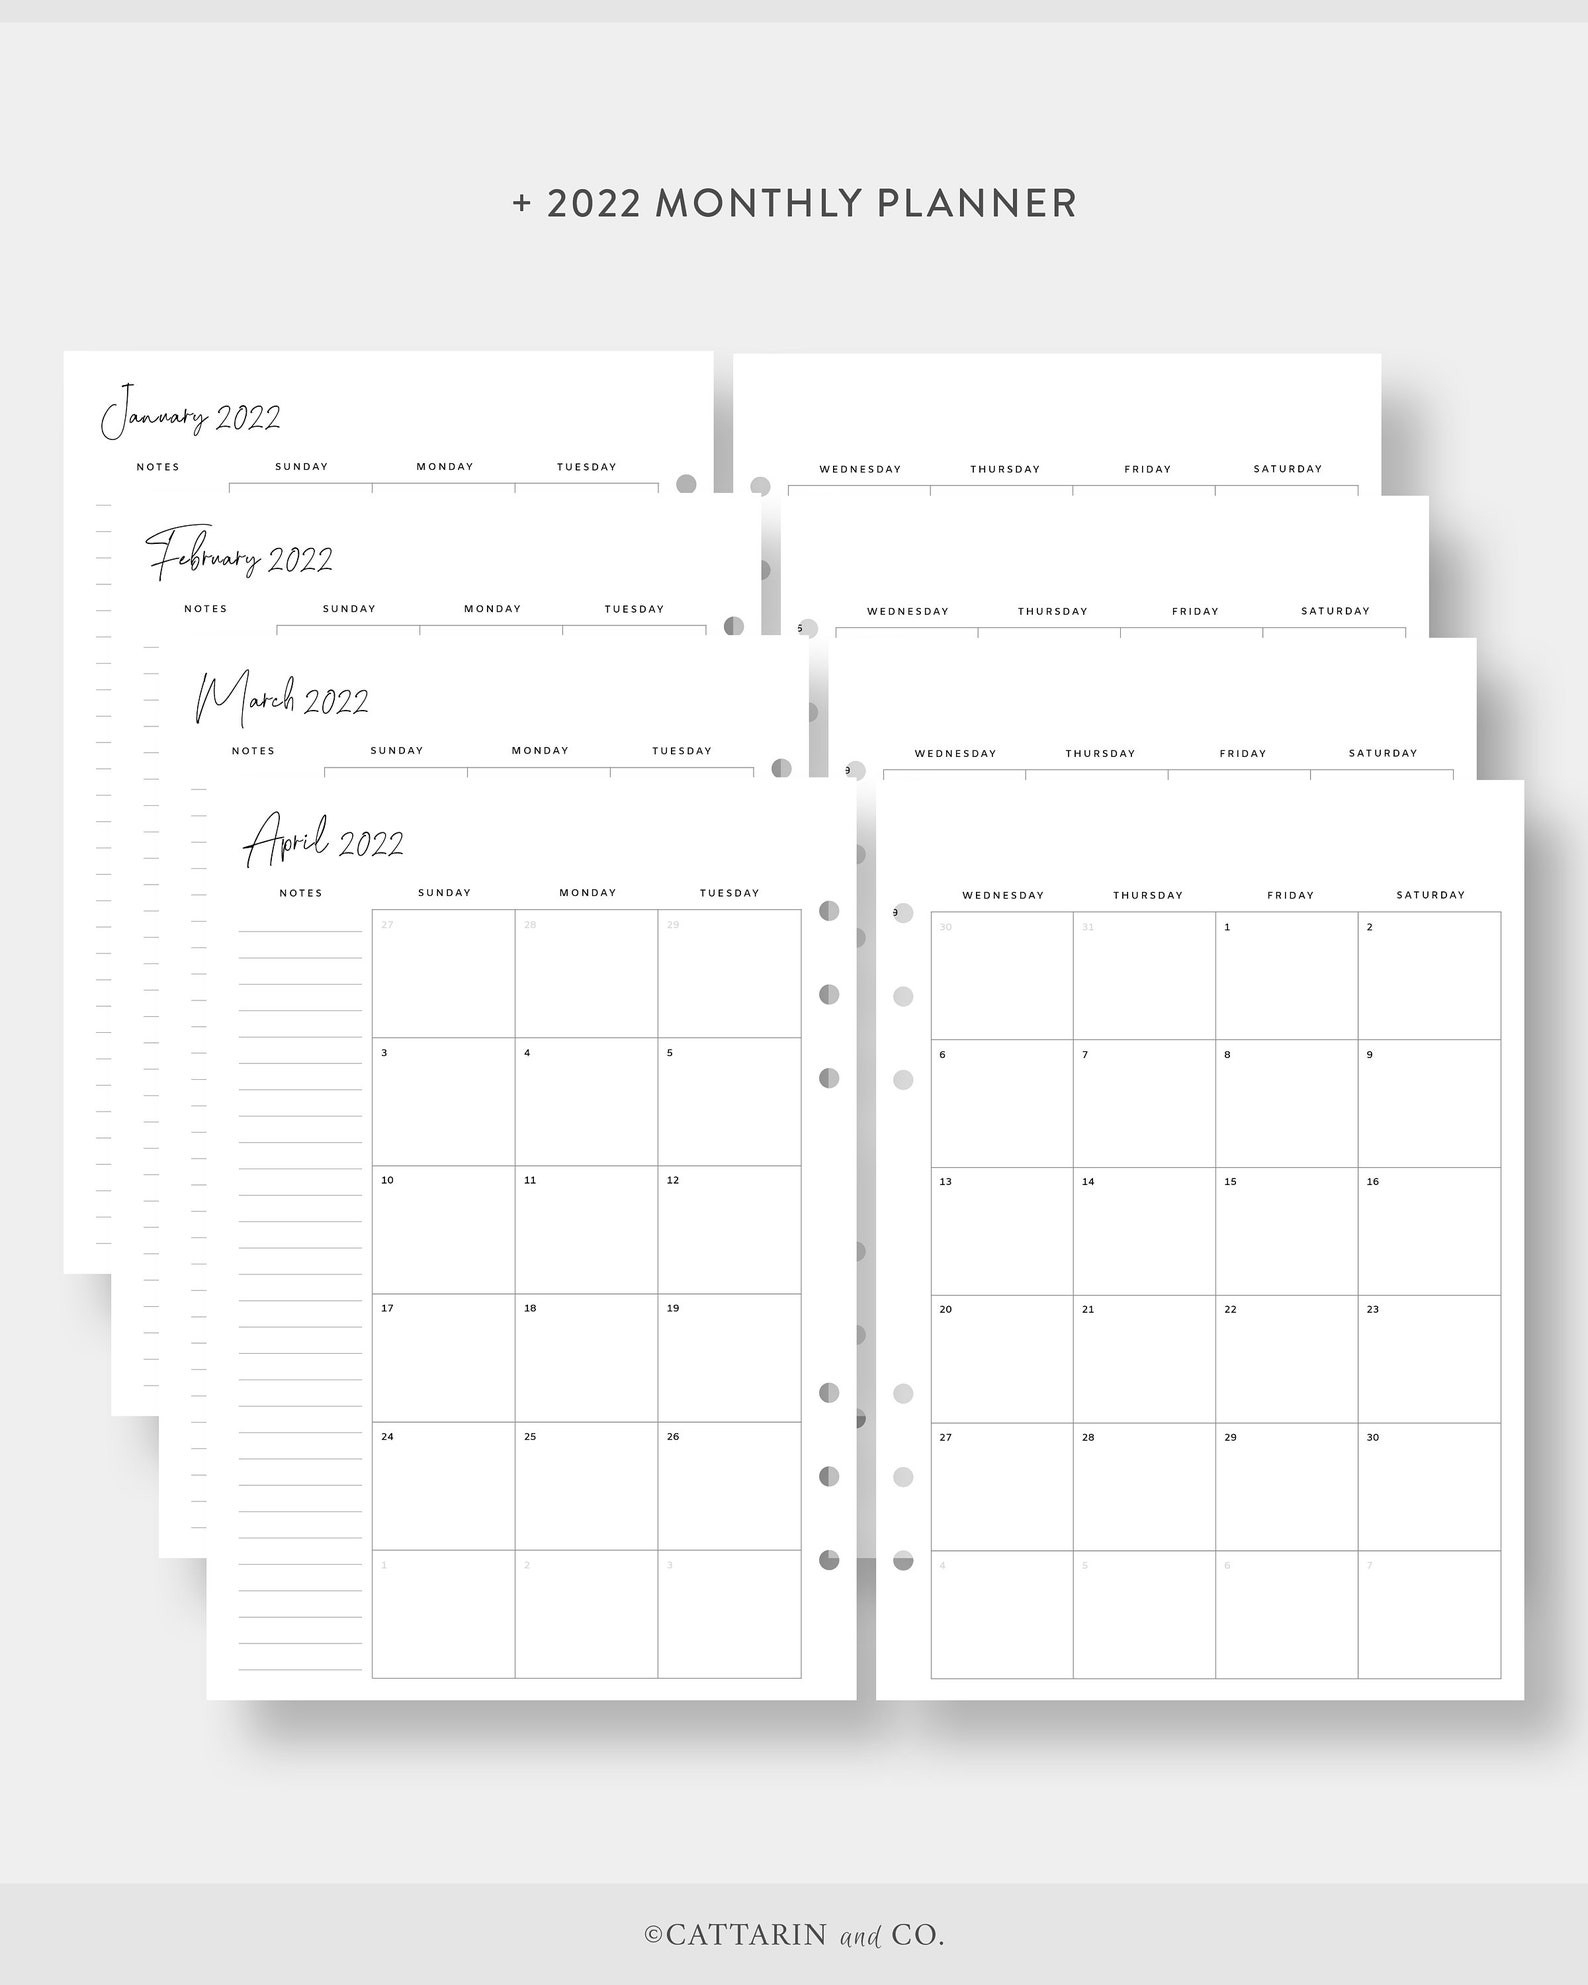 2021 2022 Monthly Planner Printable Calendar On Two Pages  Printable Calendar 2022 Half Page